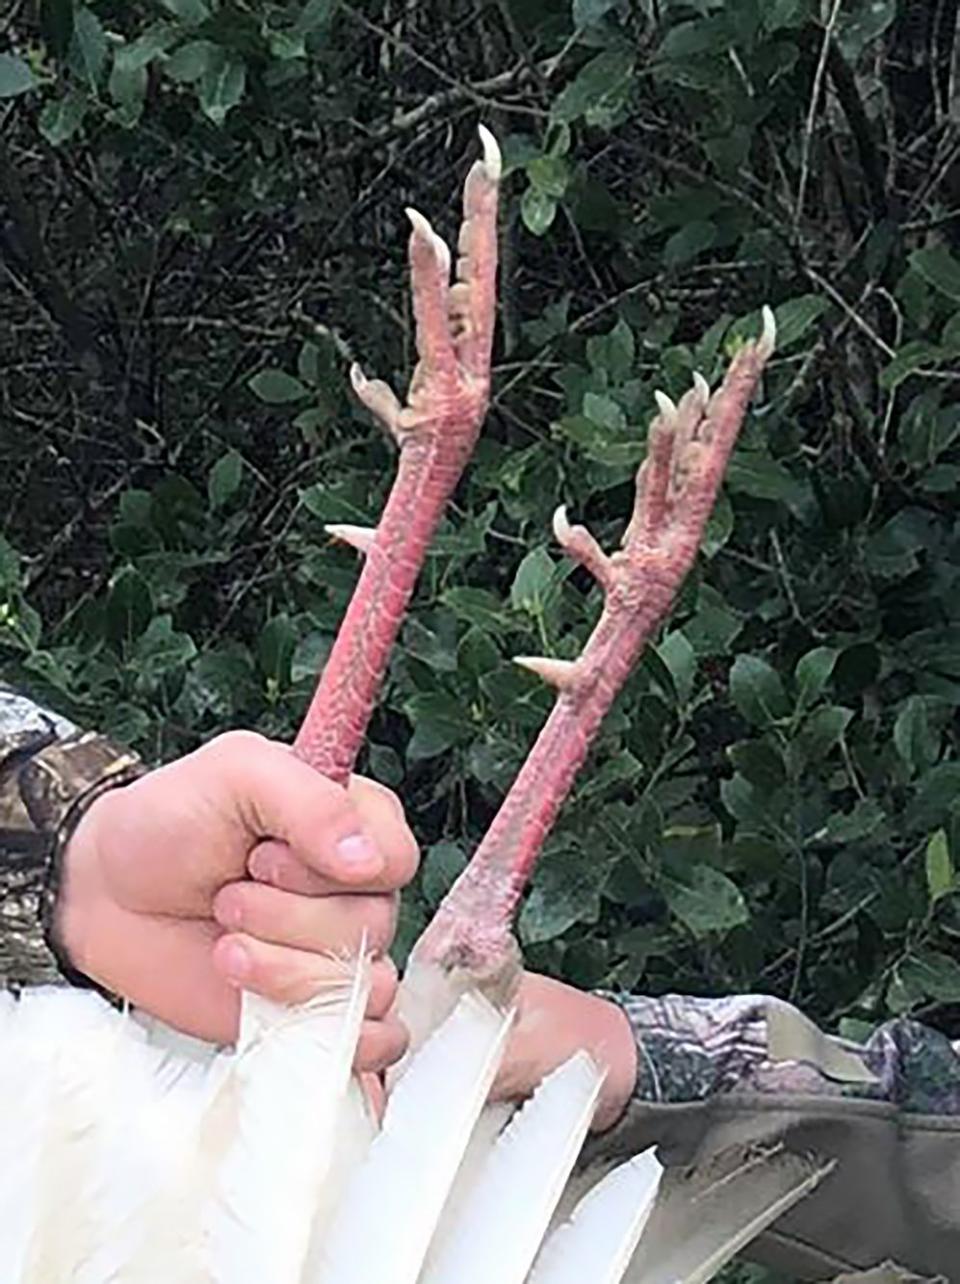 The turkey's beard was black, but its spurs and nails were white. Experts say the animal is 'exceptionally rare.'